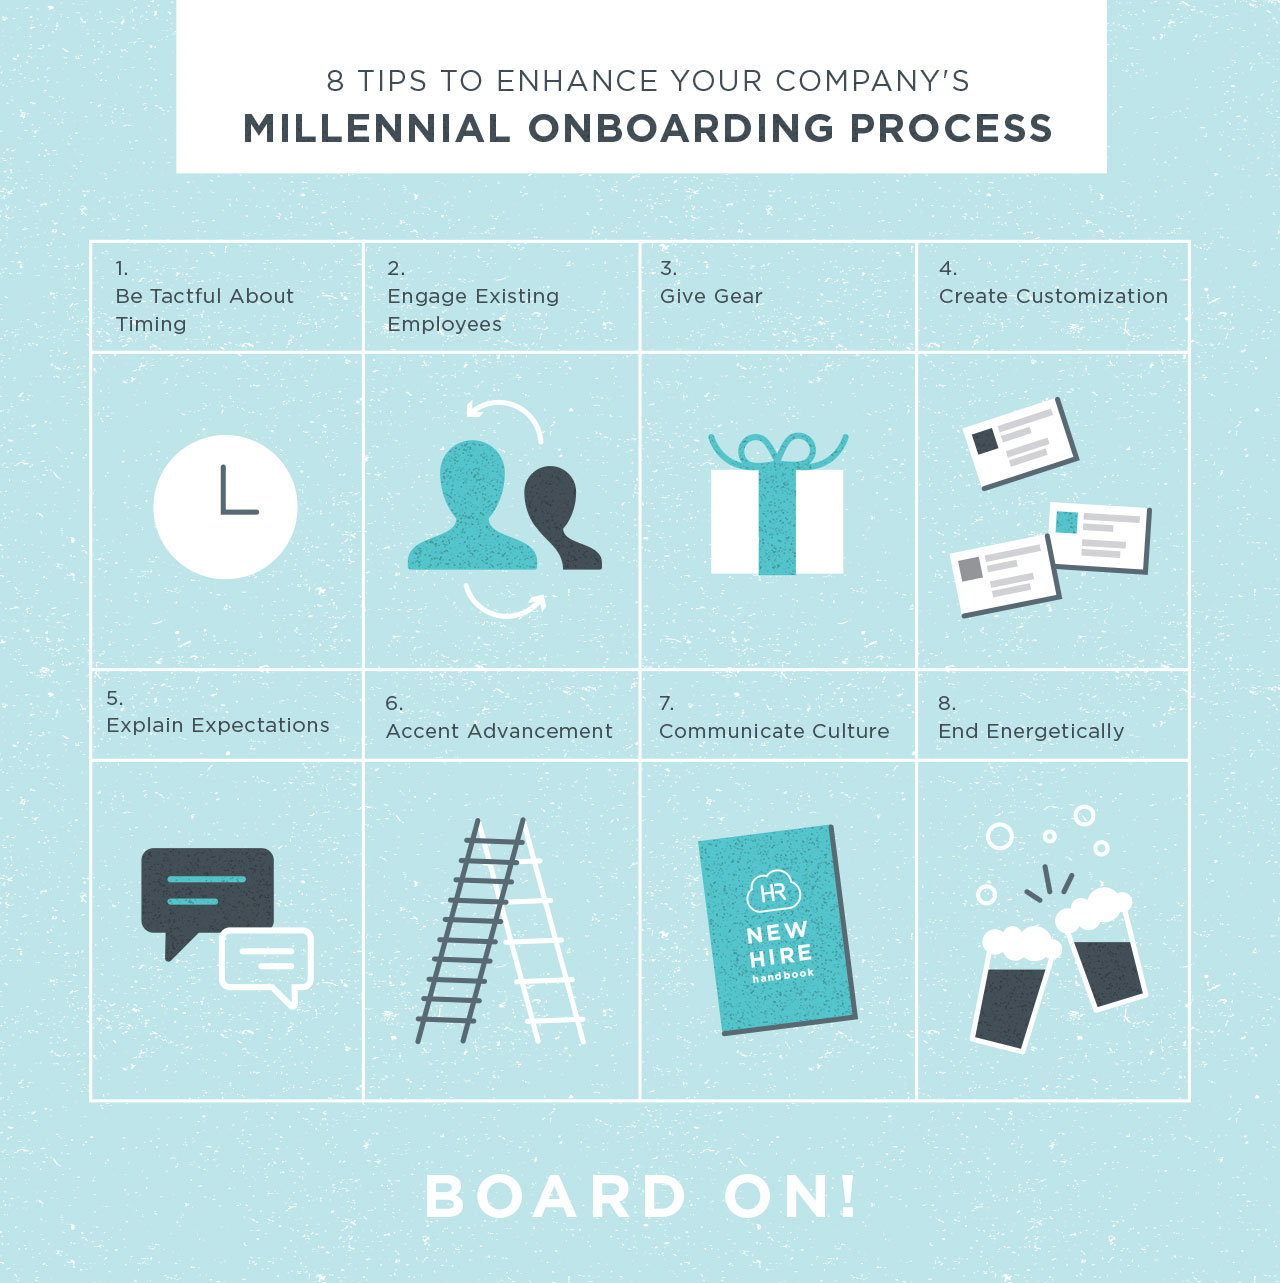 8 Tips to Enhance Your Millennial Onboarding Process